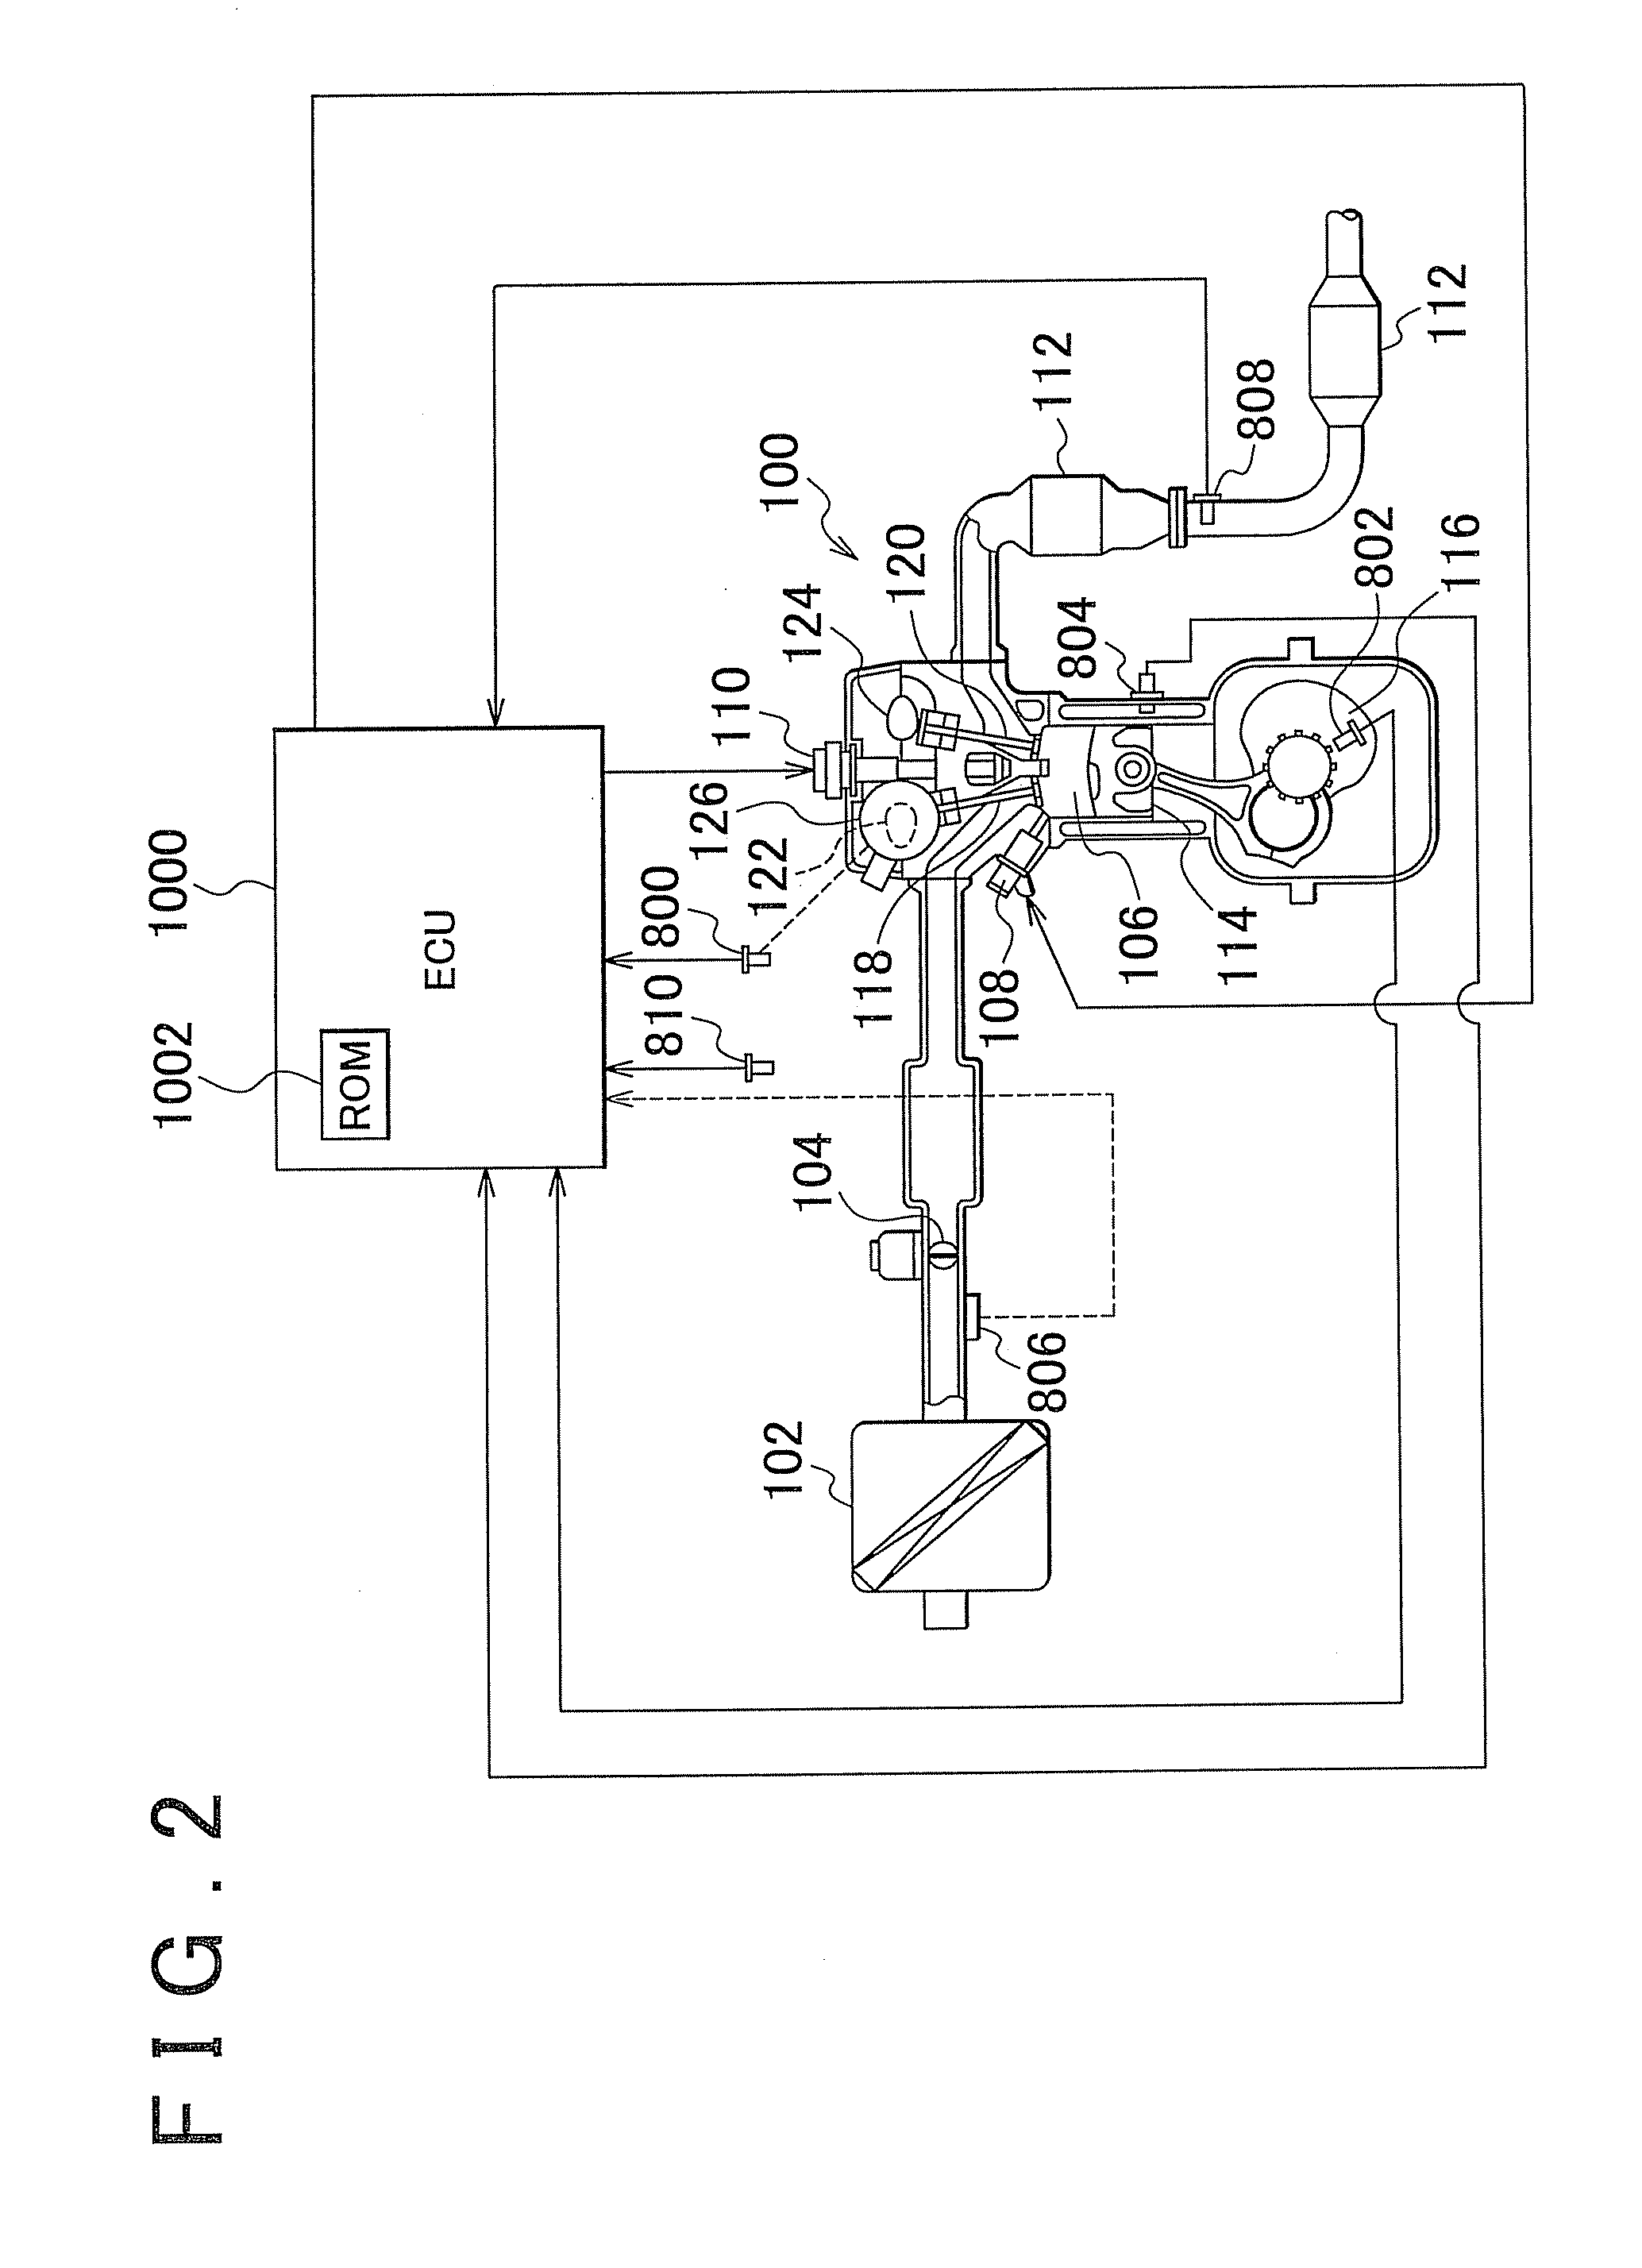 Vehicle, abnormality determination method for internal combustion engine, and abnormality determination device for internal combustion engine